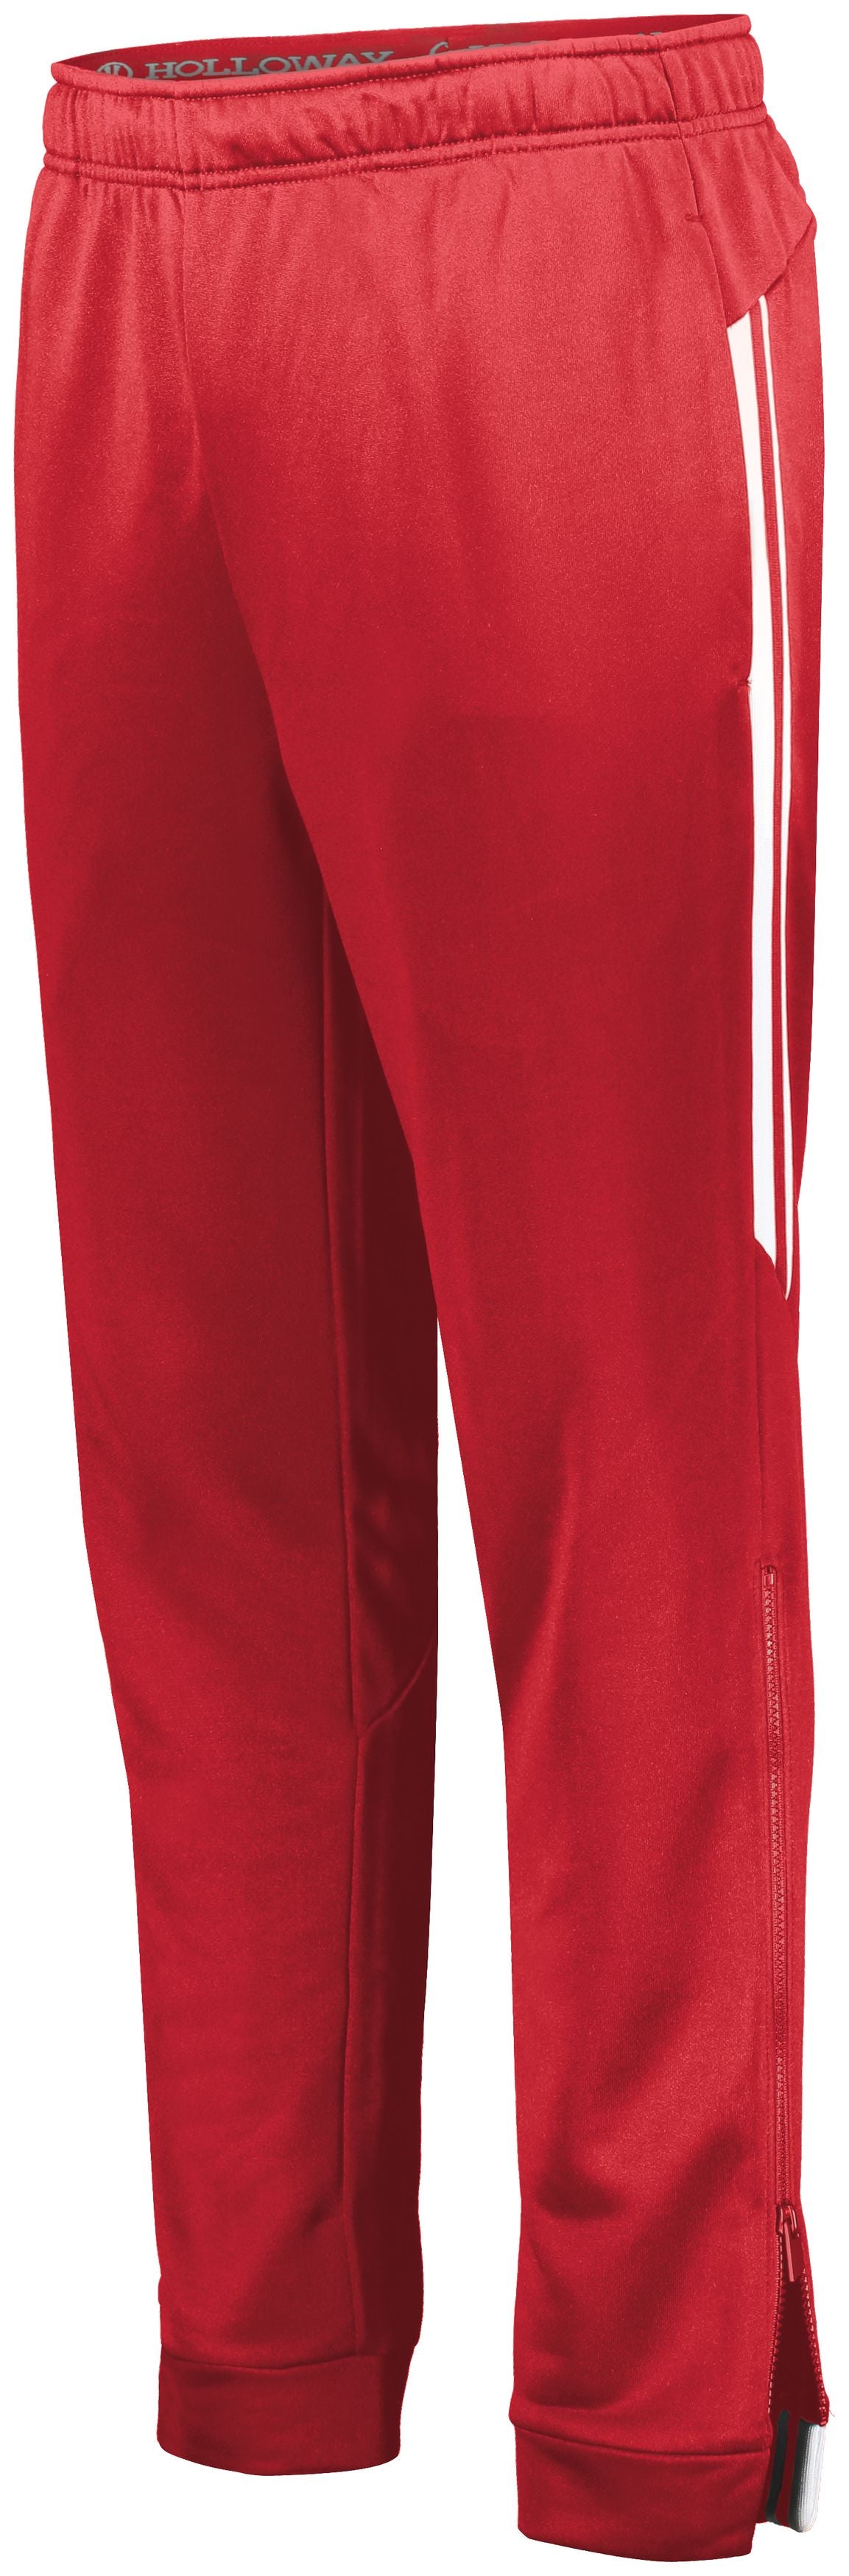 Holloway Youth Retro Grade Pant in Scarlet/White  -Part of the Youth, Youth-Pants, Pants, Holloway product lines at KanaleyCreations.com